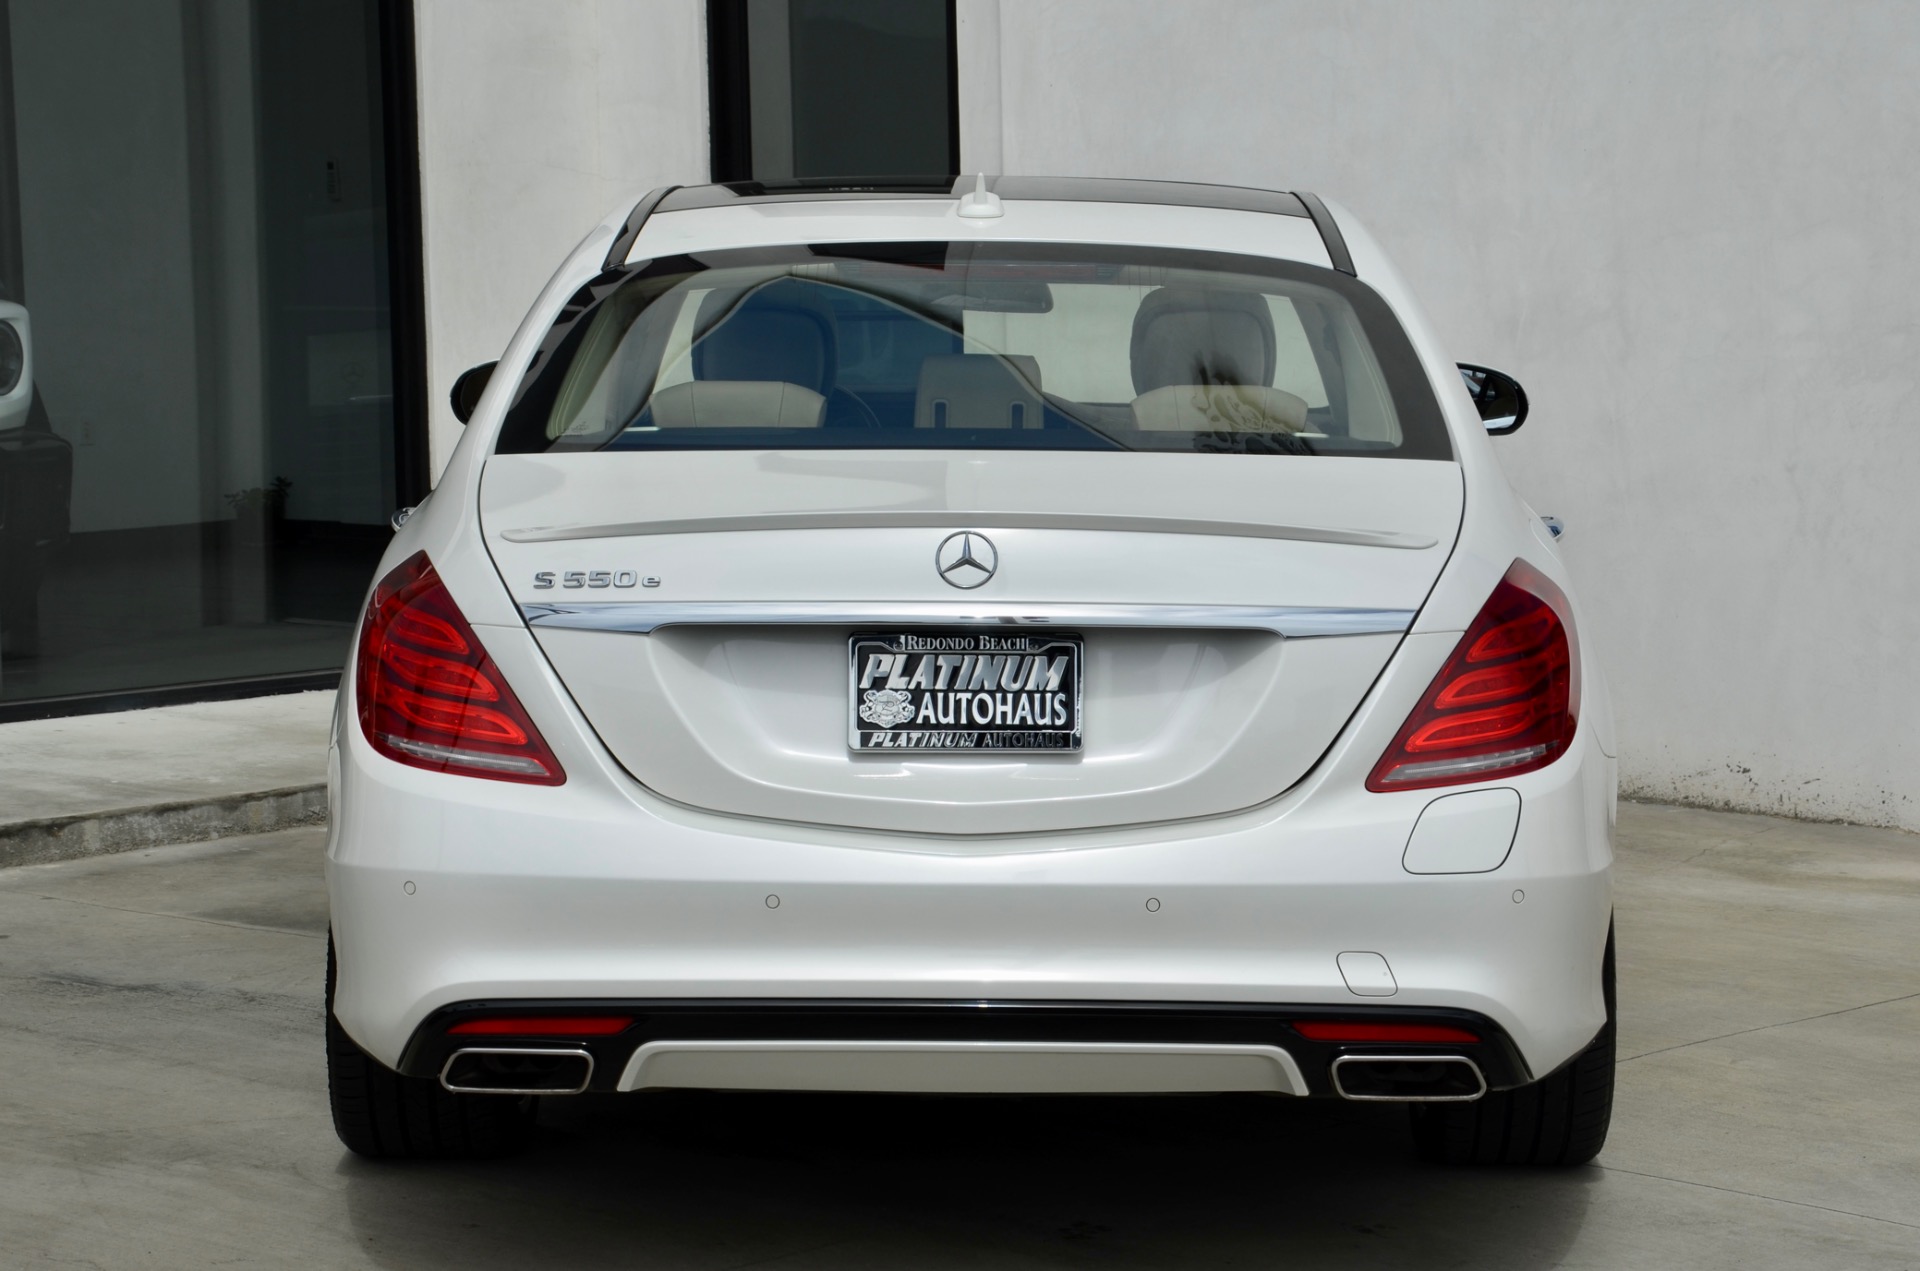 Used-2017-Mercedes-Benz-S-Class-S-550e